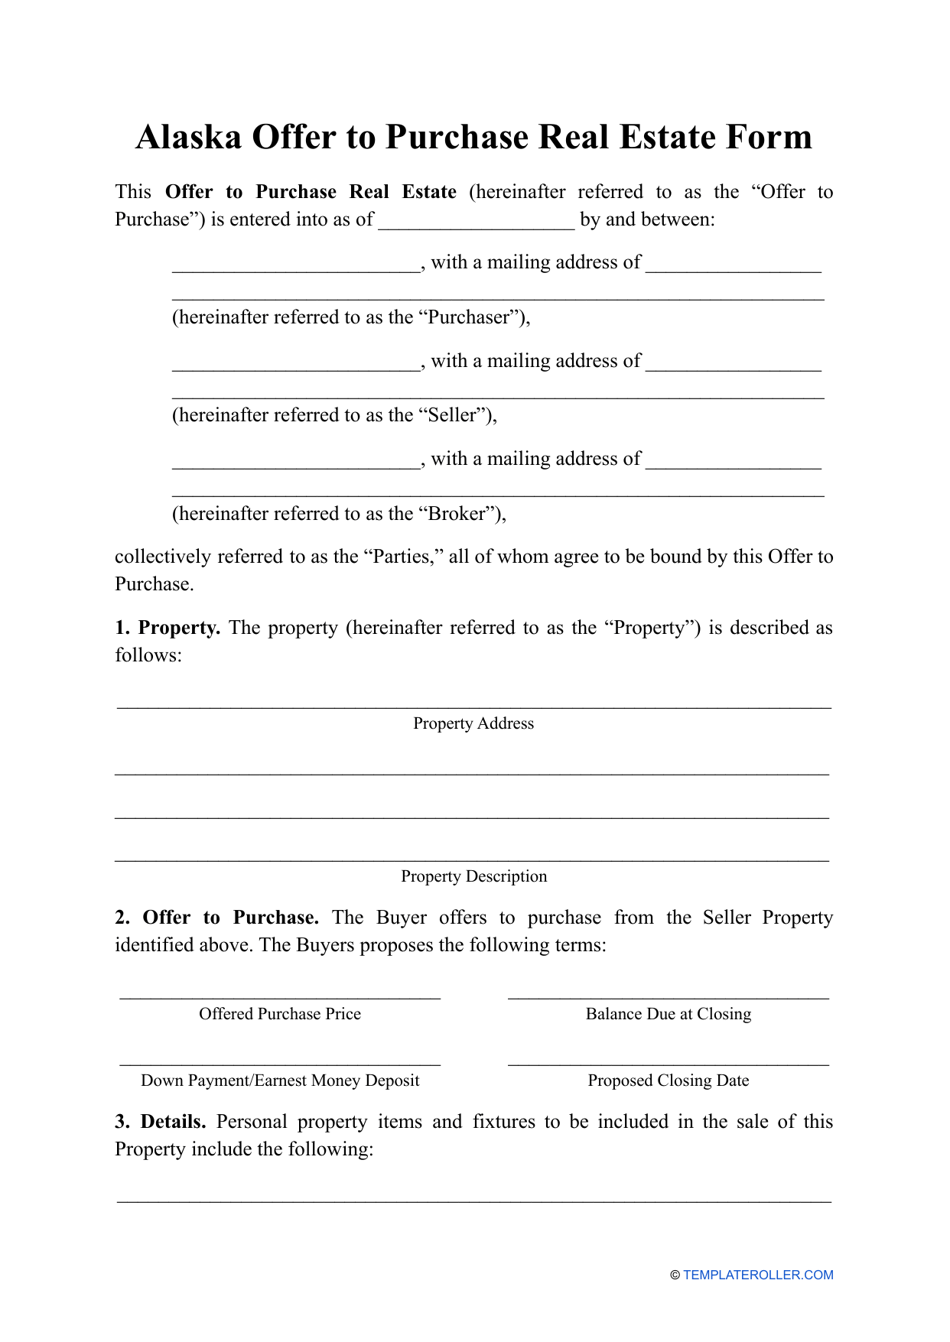 Offer to Purchase Real Estate Form - Alaska, Page 1